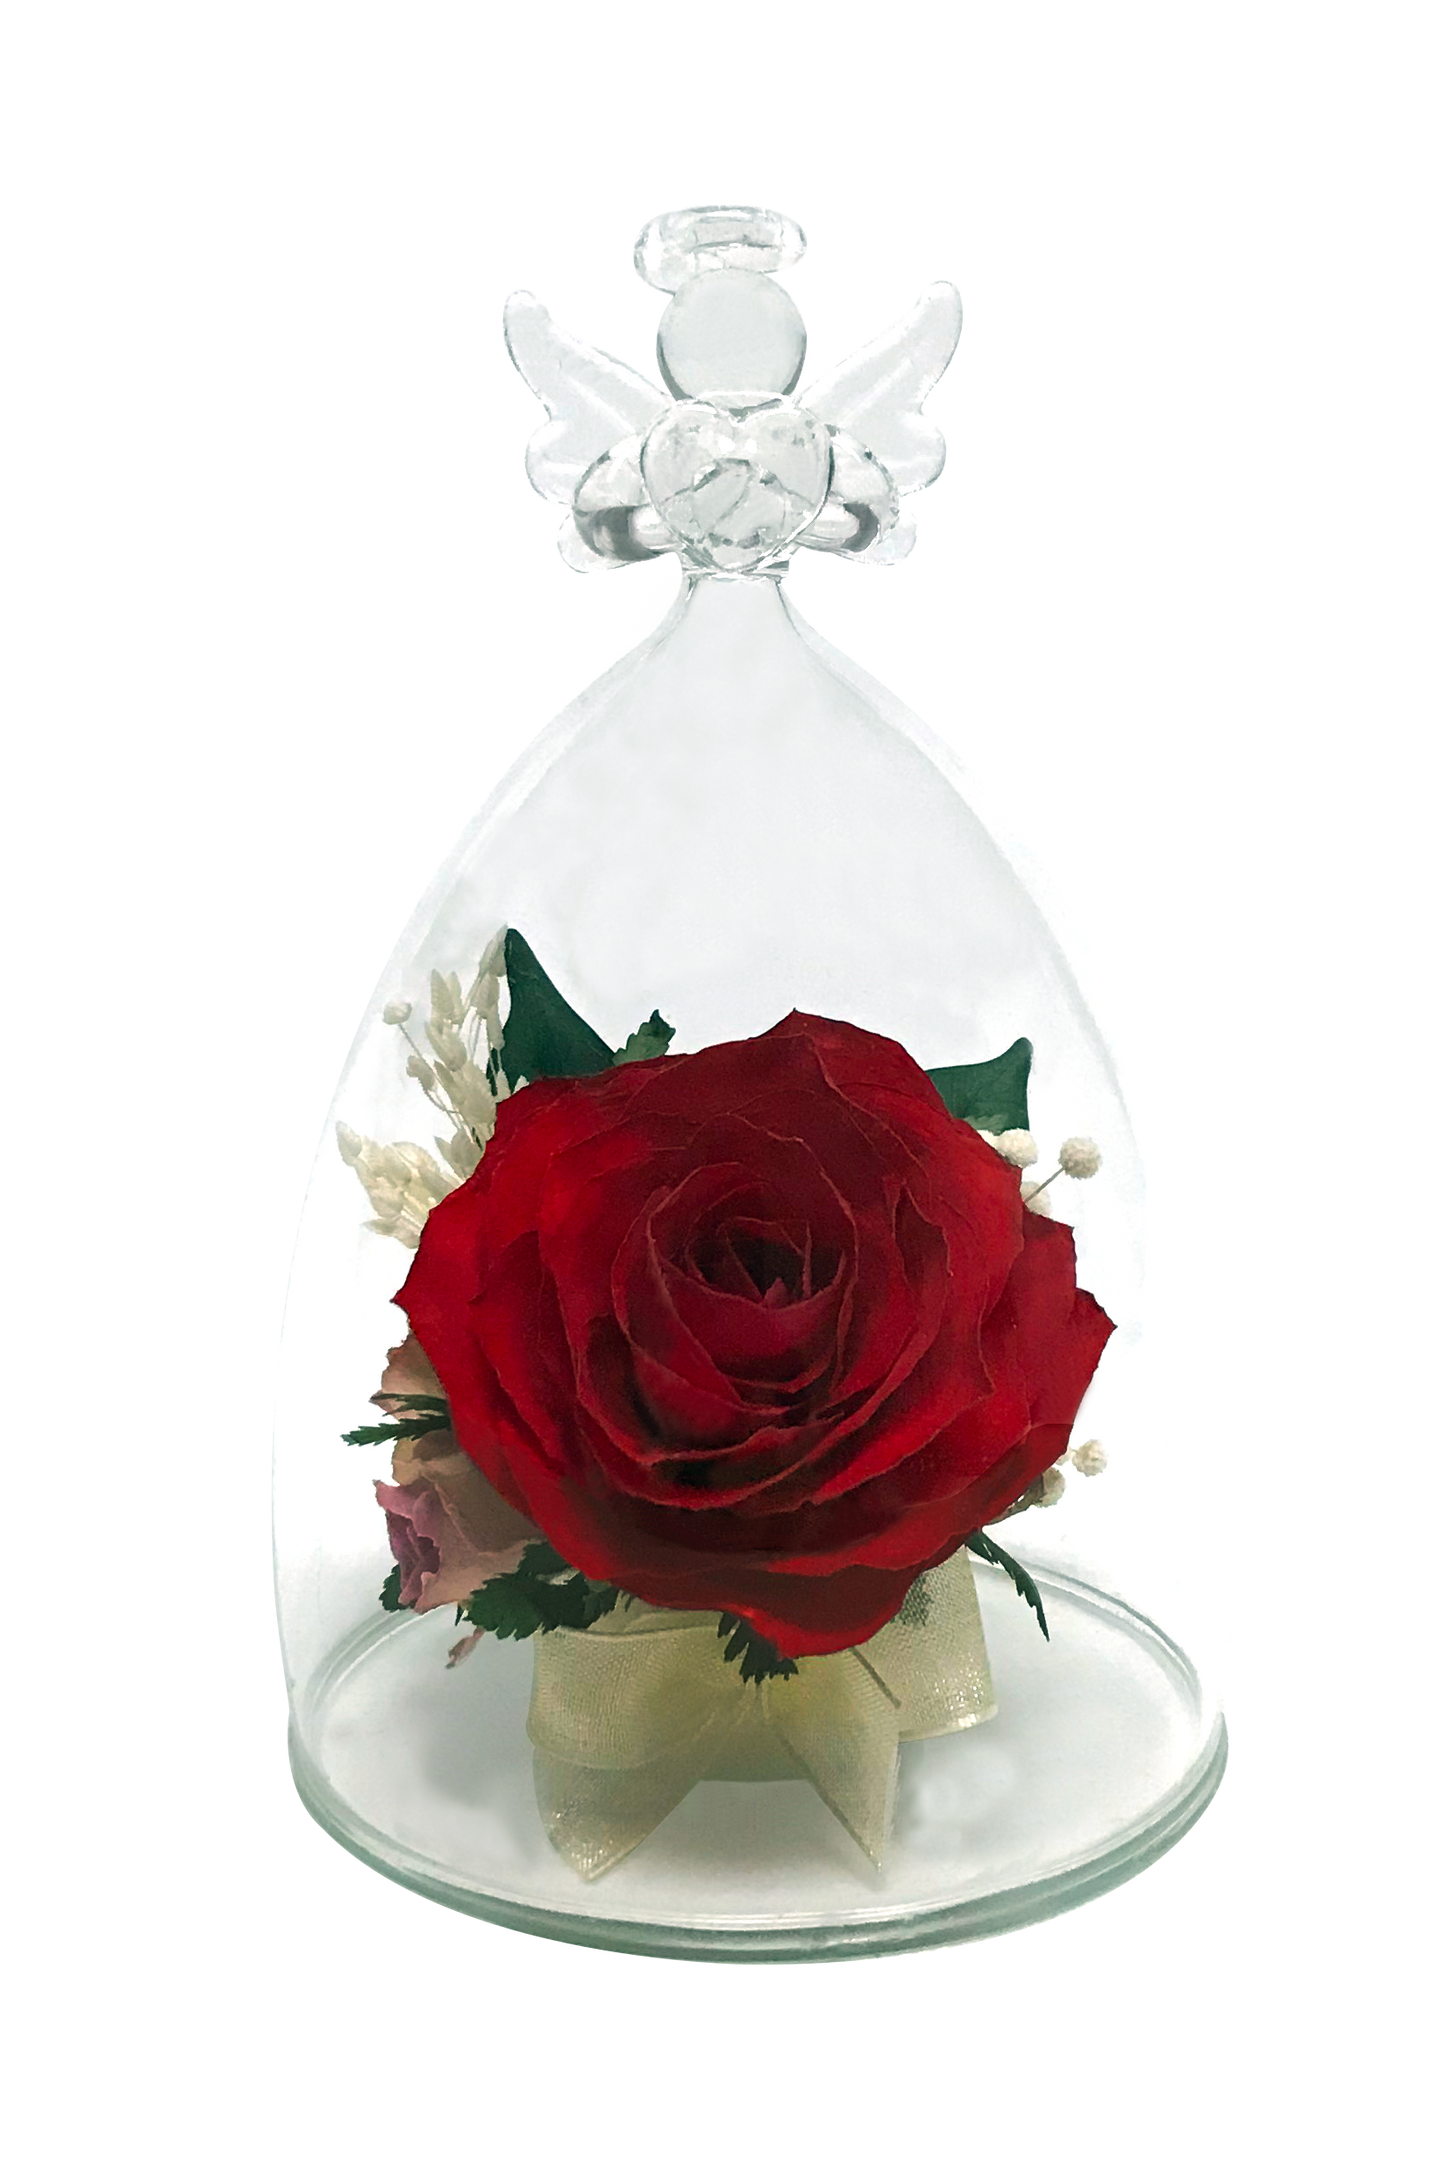 67341 Long-Lasting Red Rose in a Angel Shaped Glass Vase